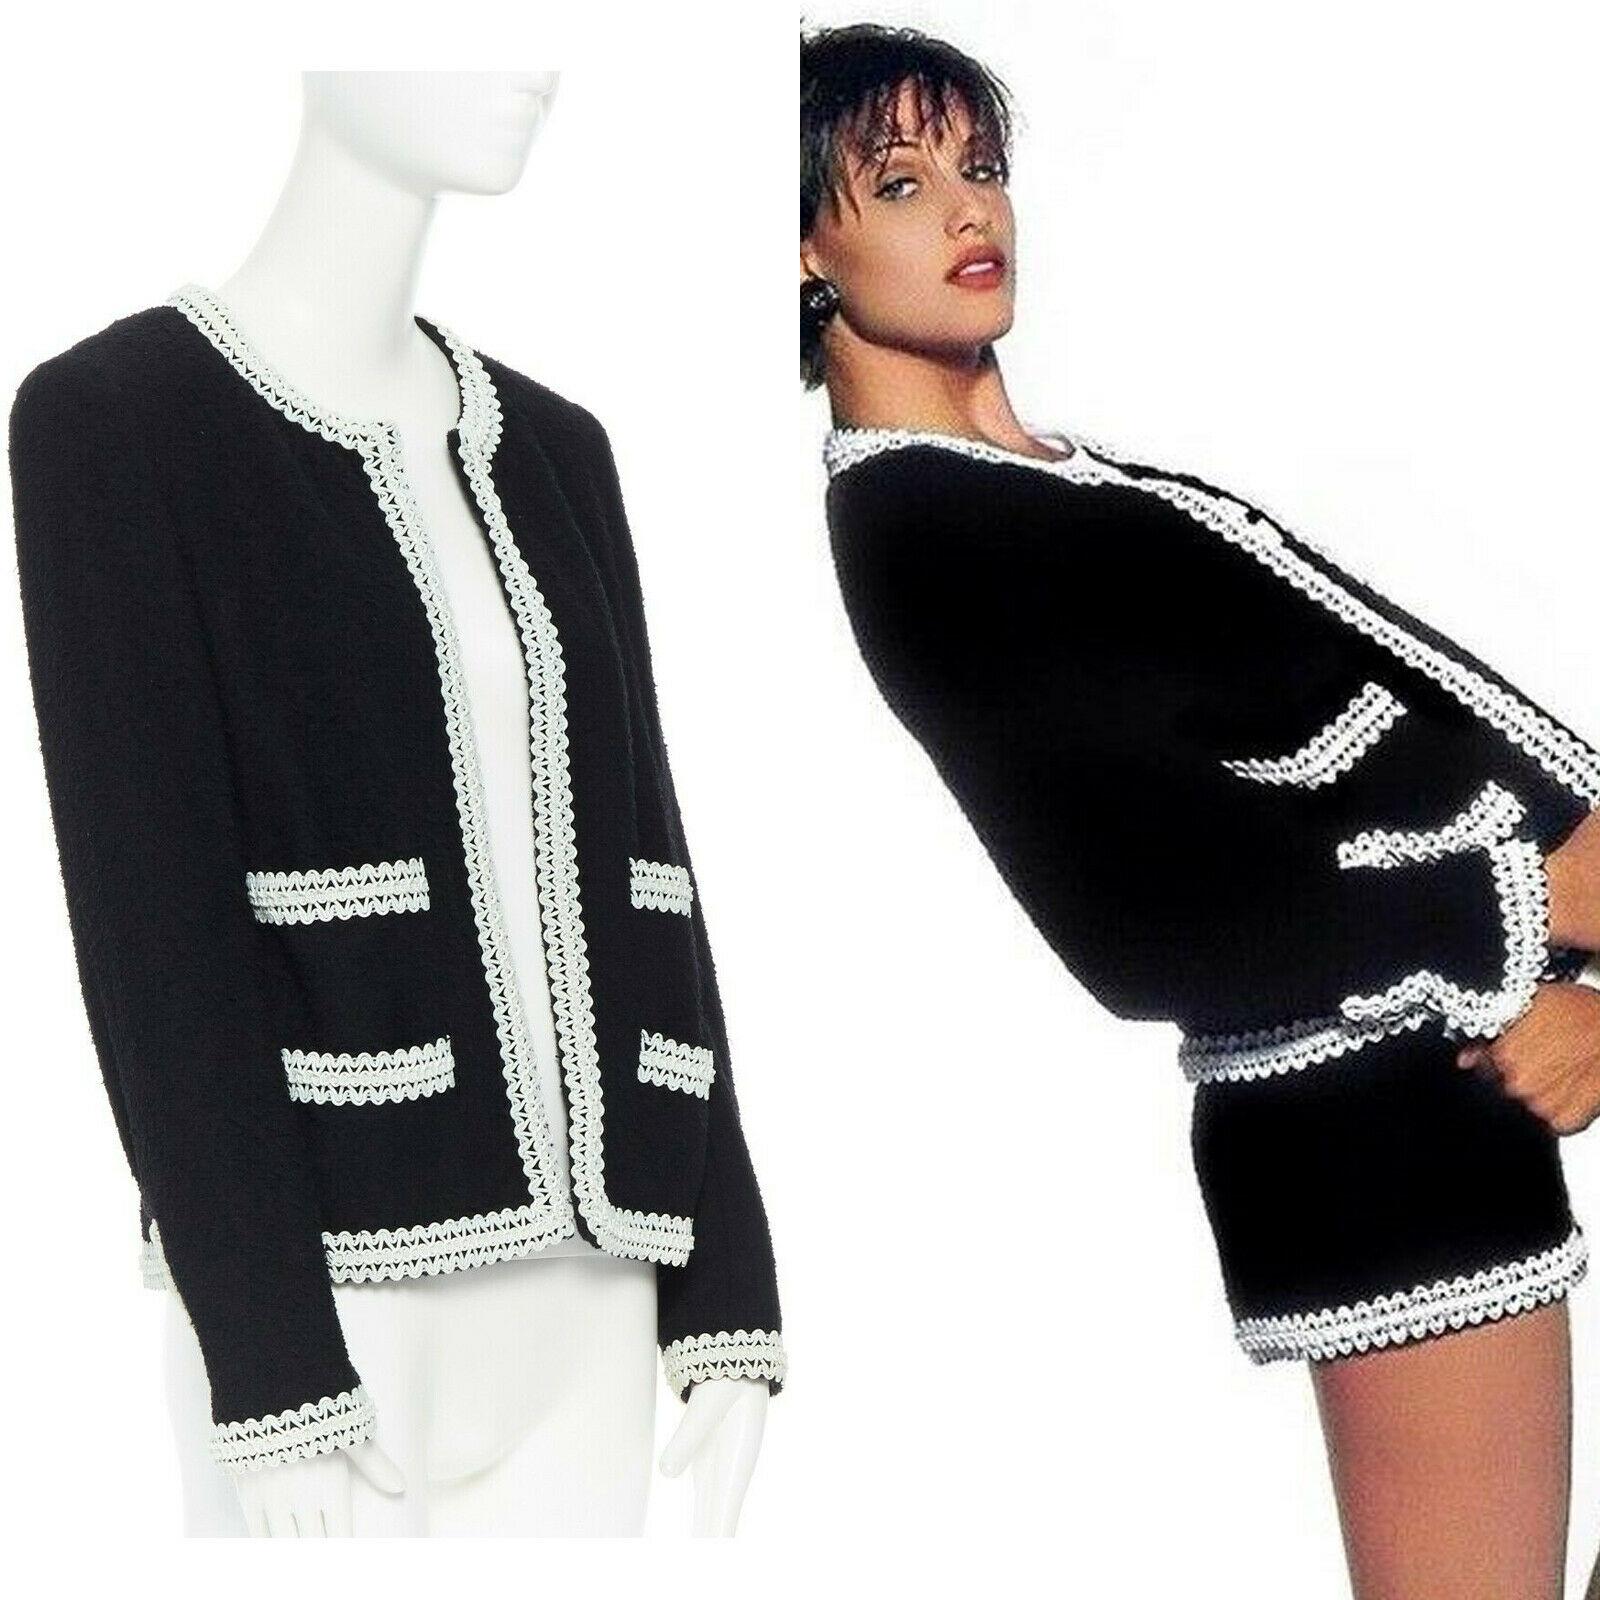 runway CHANEL 94P iconic black boucle tweed white rubber braid jacket FR38 rare
Brand: CHANEL
Designer: Karl Lagerfeld
Collection: 94P
Model Name / Style: Tweed jacket
Material: Wool tweed
Color: Black and white trimming
Pattern: Solid
Lining